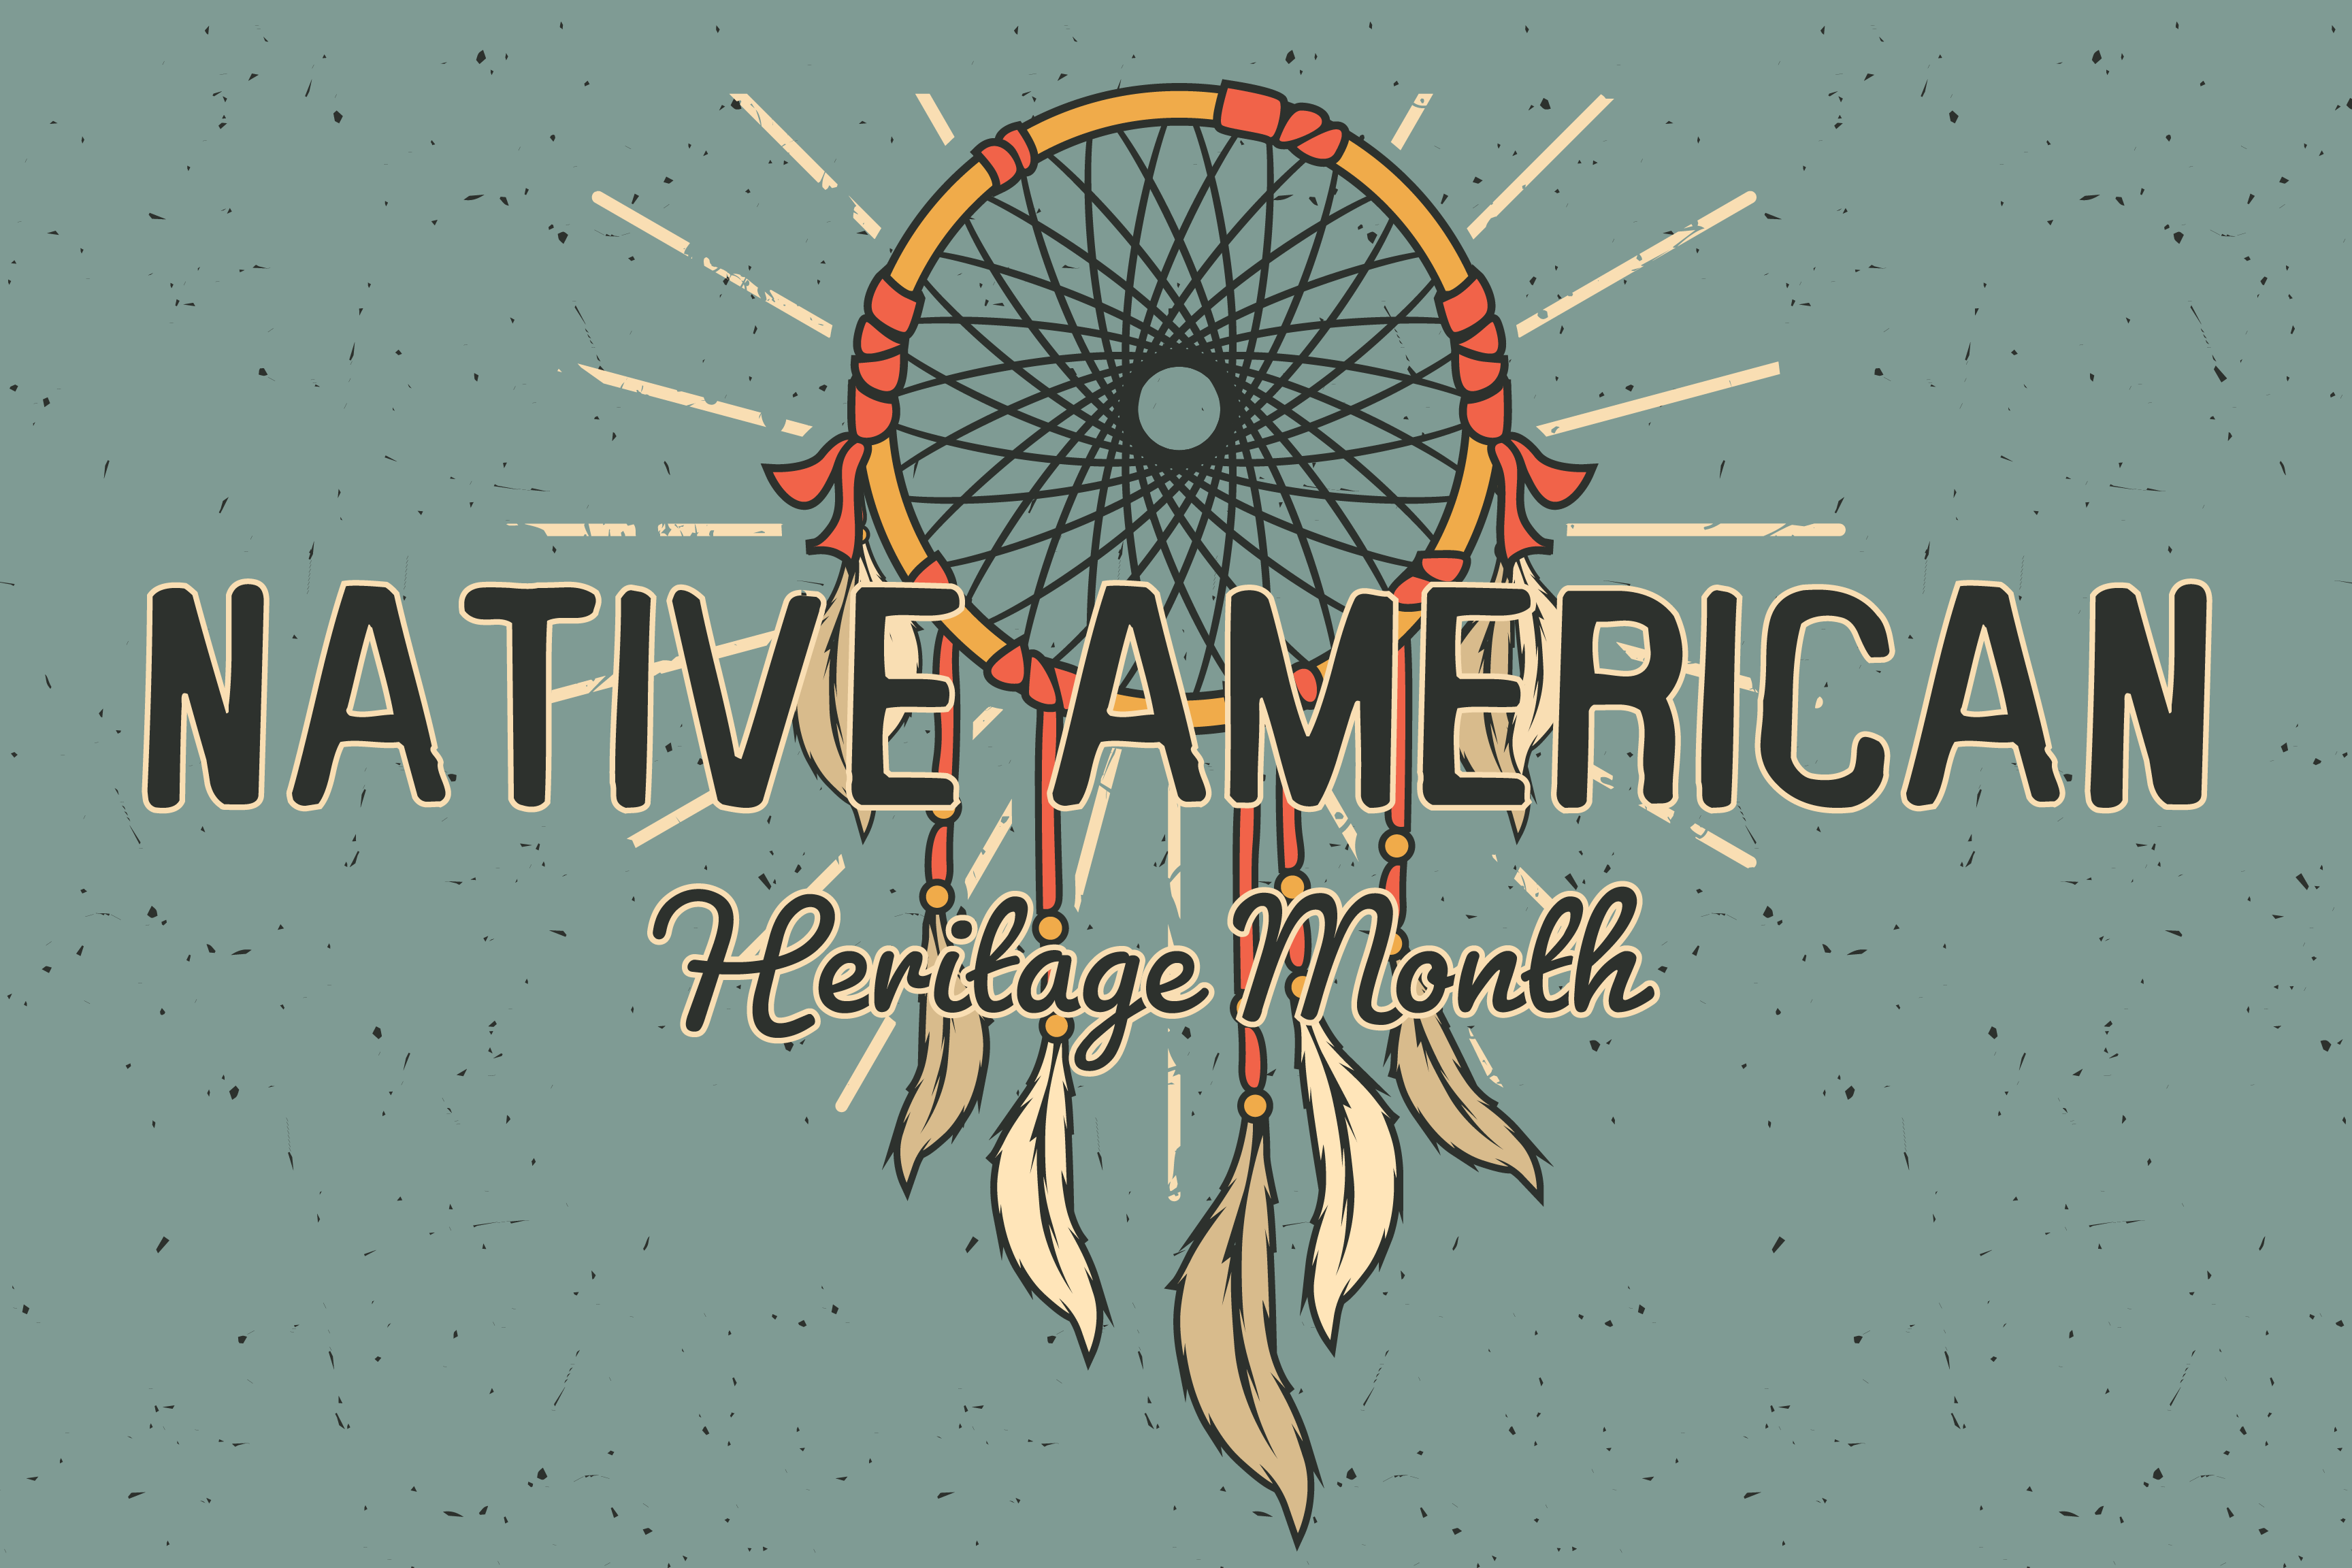 Native American Heritage Month to raise awareness Sun News Daily